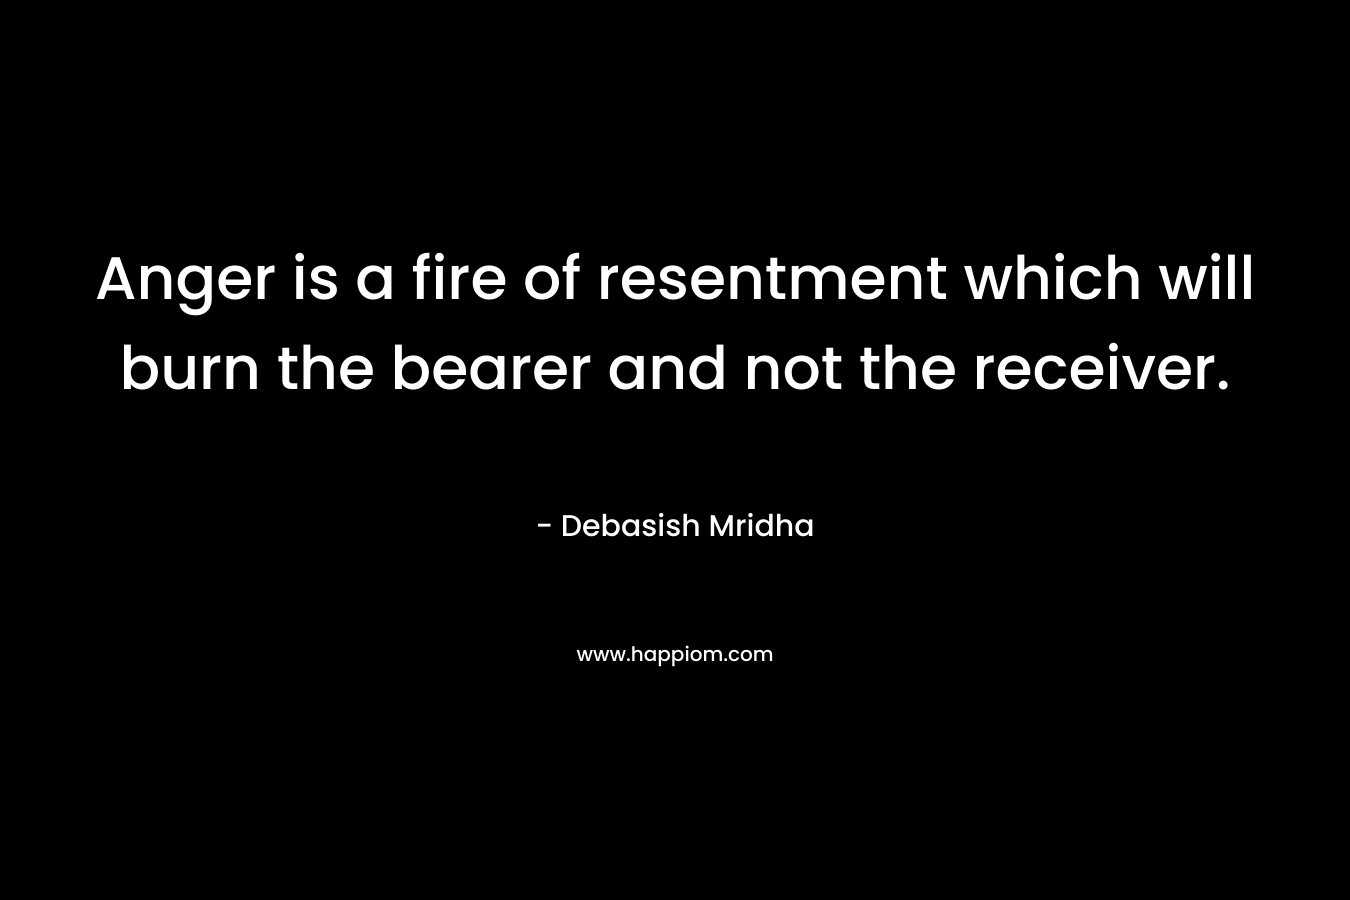 Anger is a fire of resentment which will burn the bearer and not the receiver. – Debasish Mridha